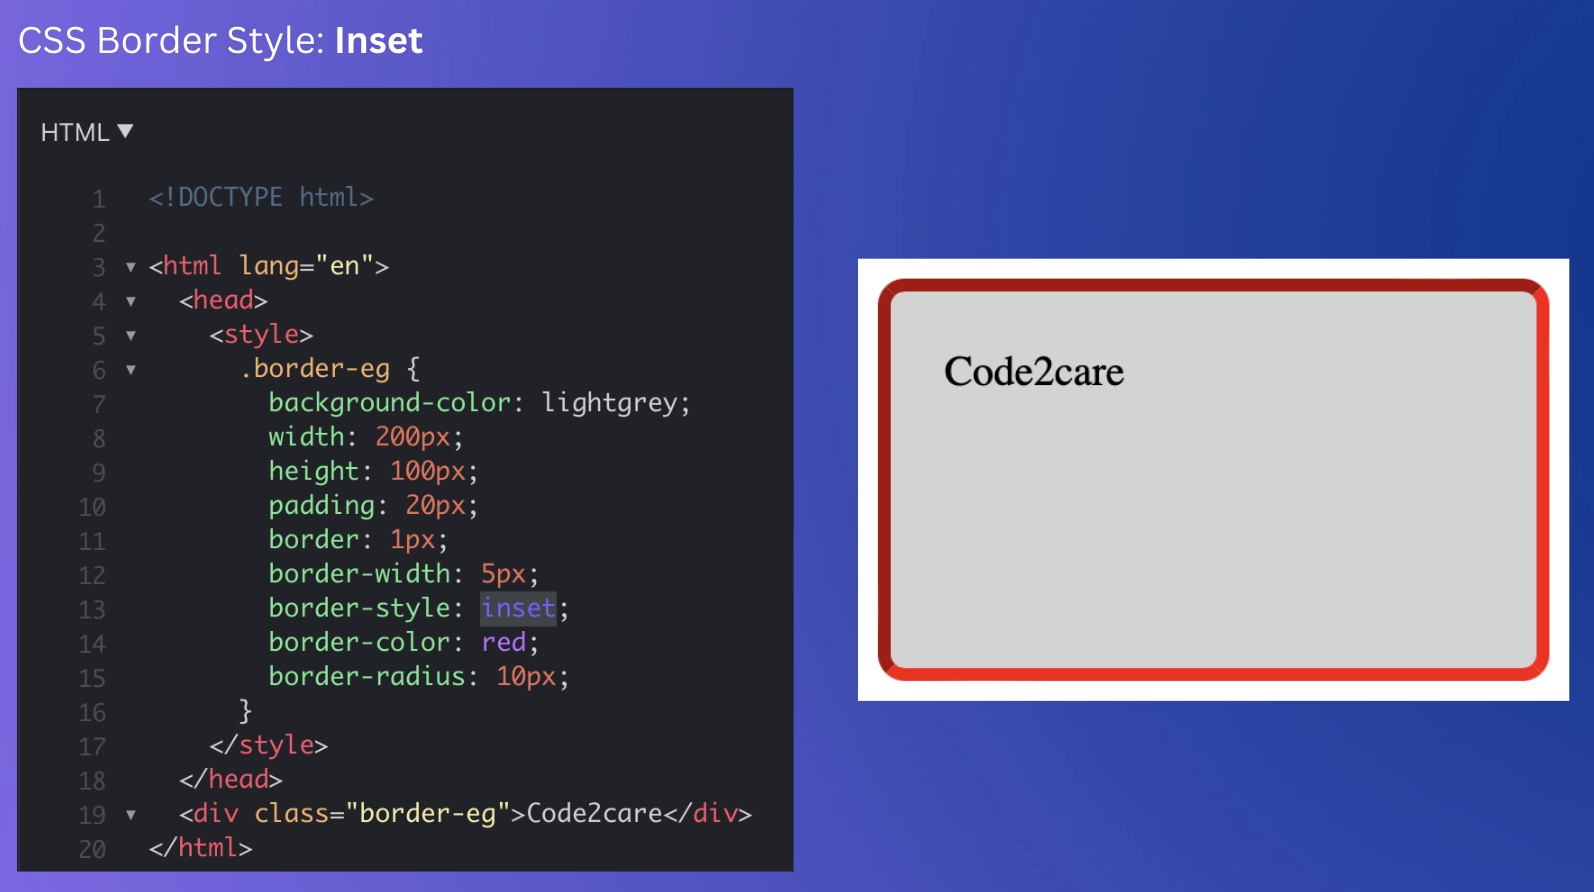 CSS Border Style - Inset